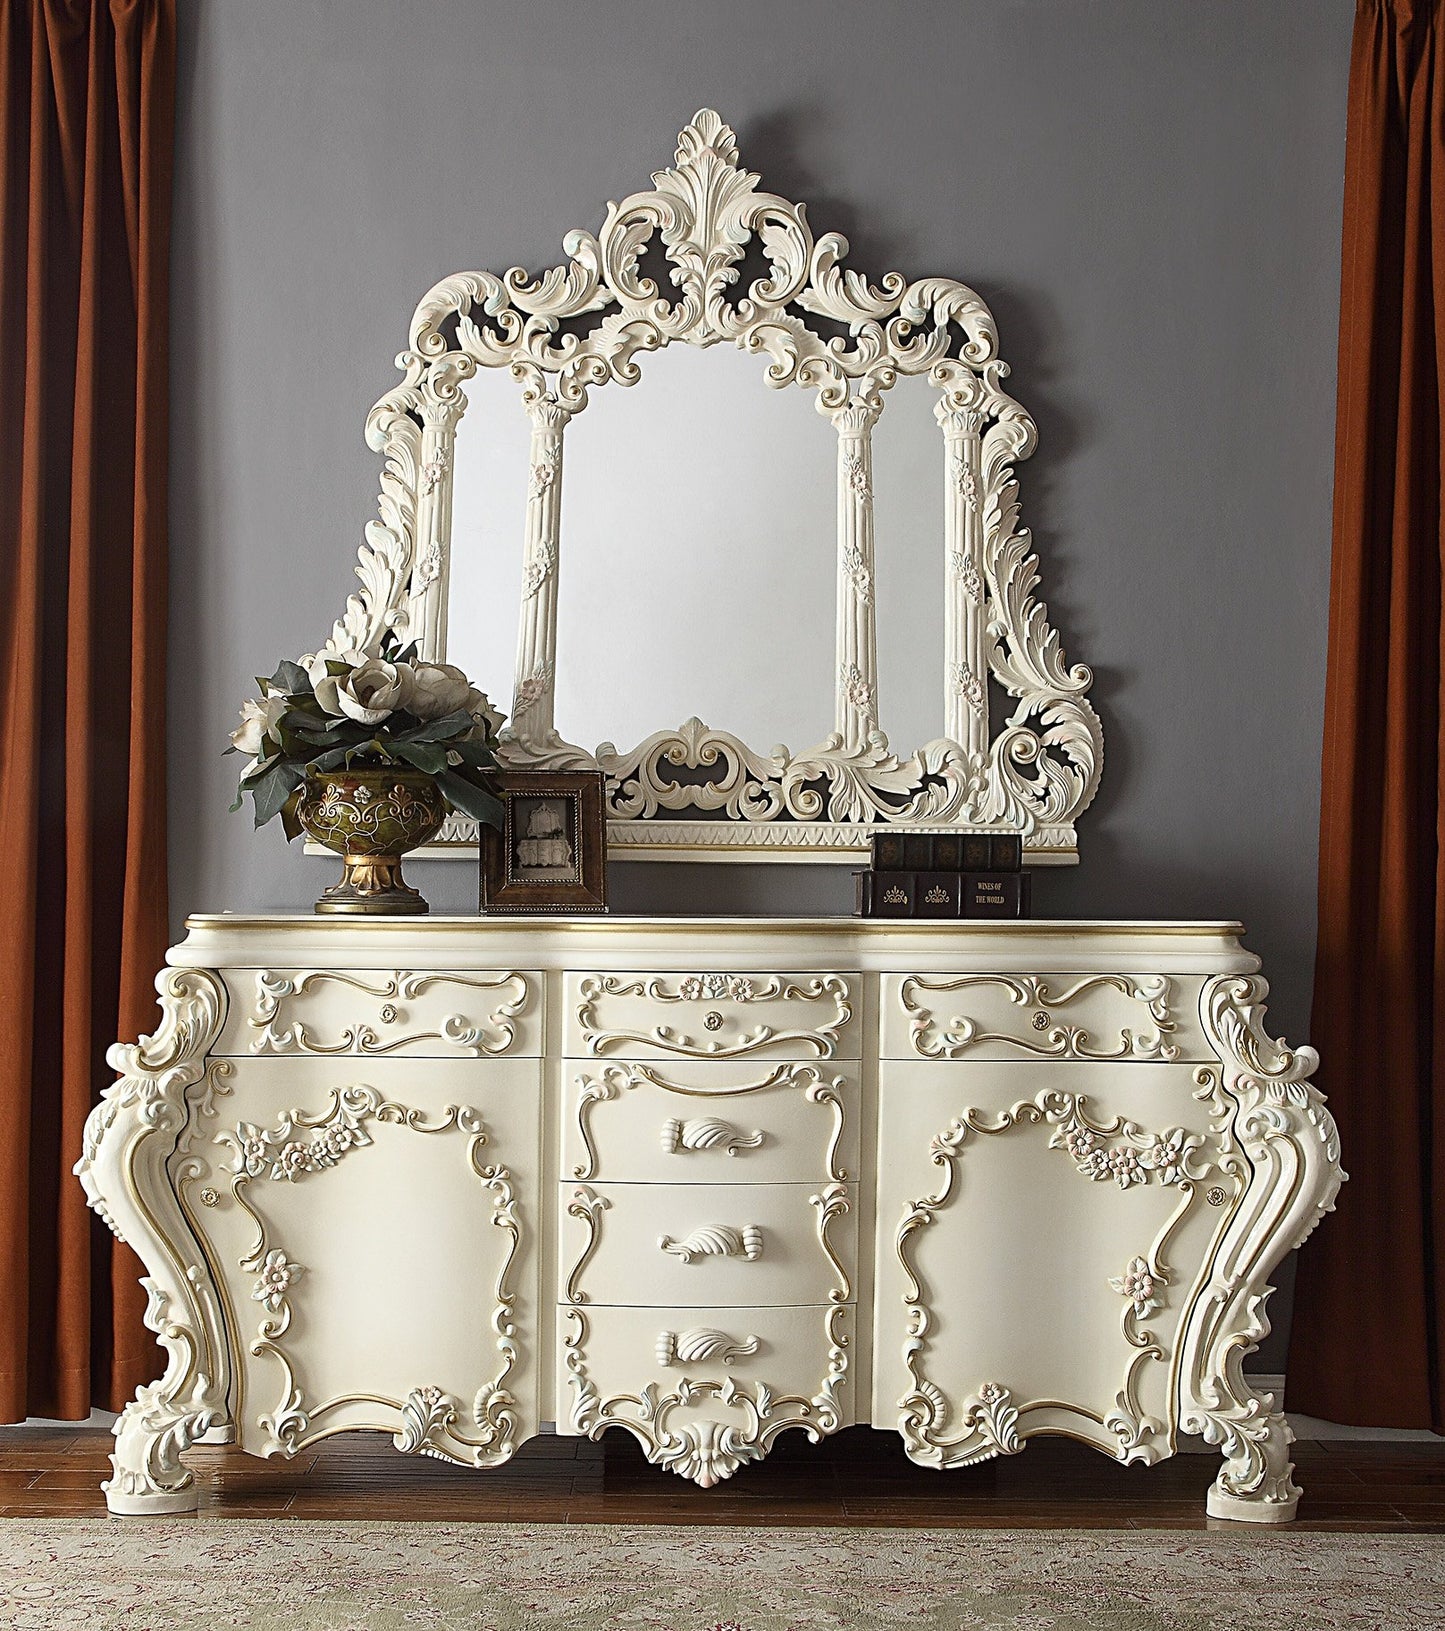 Dresser in White Gloss Finish DR8089 European Traditional Victorian